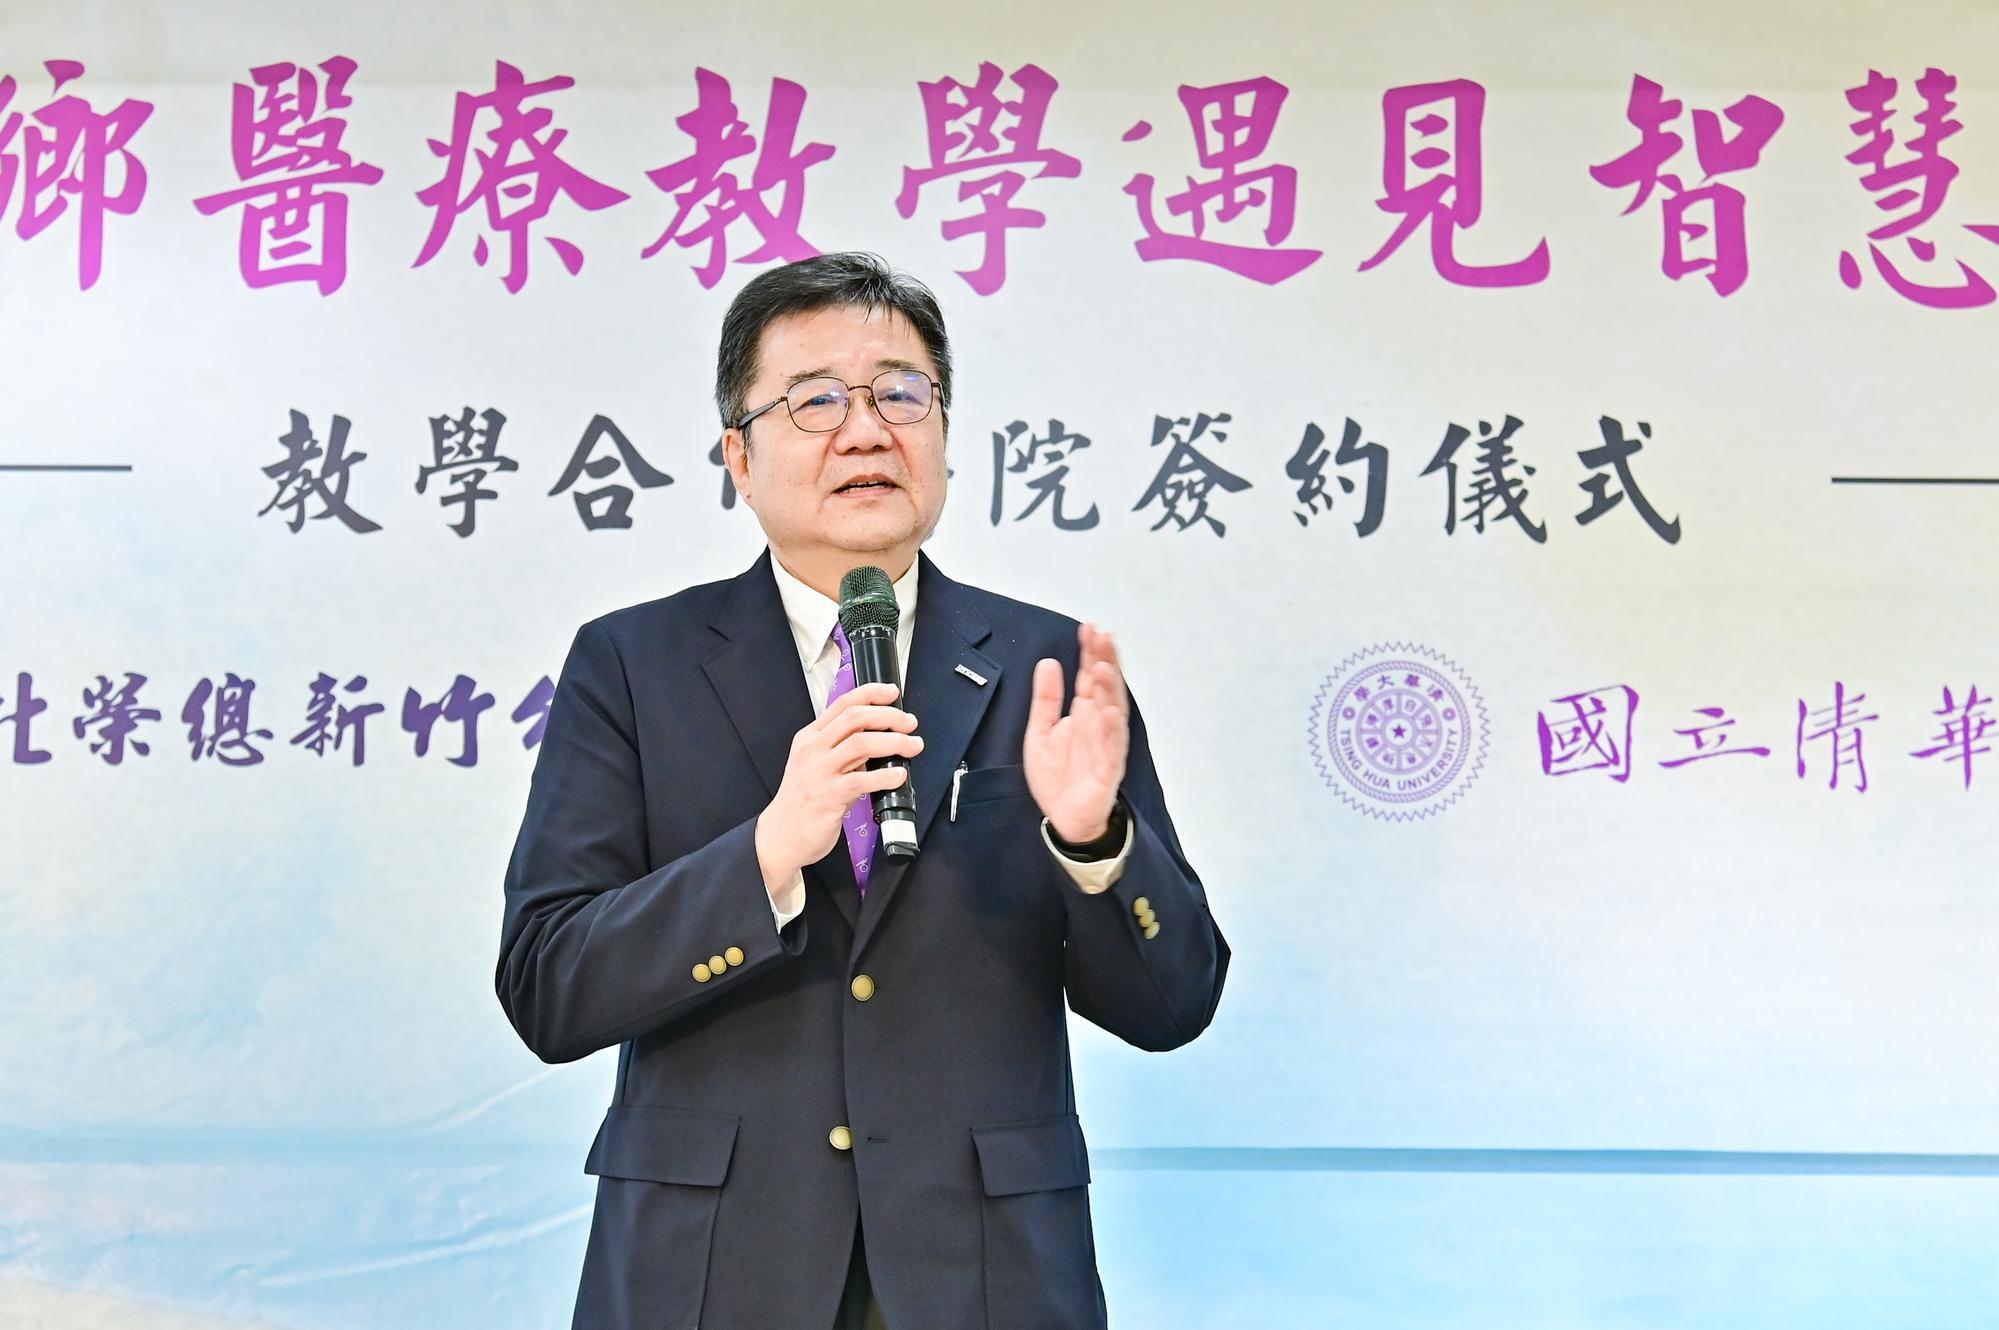 Lyu said that the Hsinchu TVGH is an excellent place for PPM graduates to begin their careers.